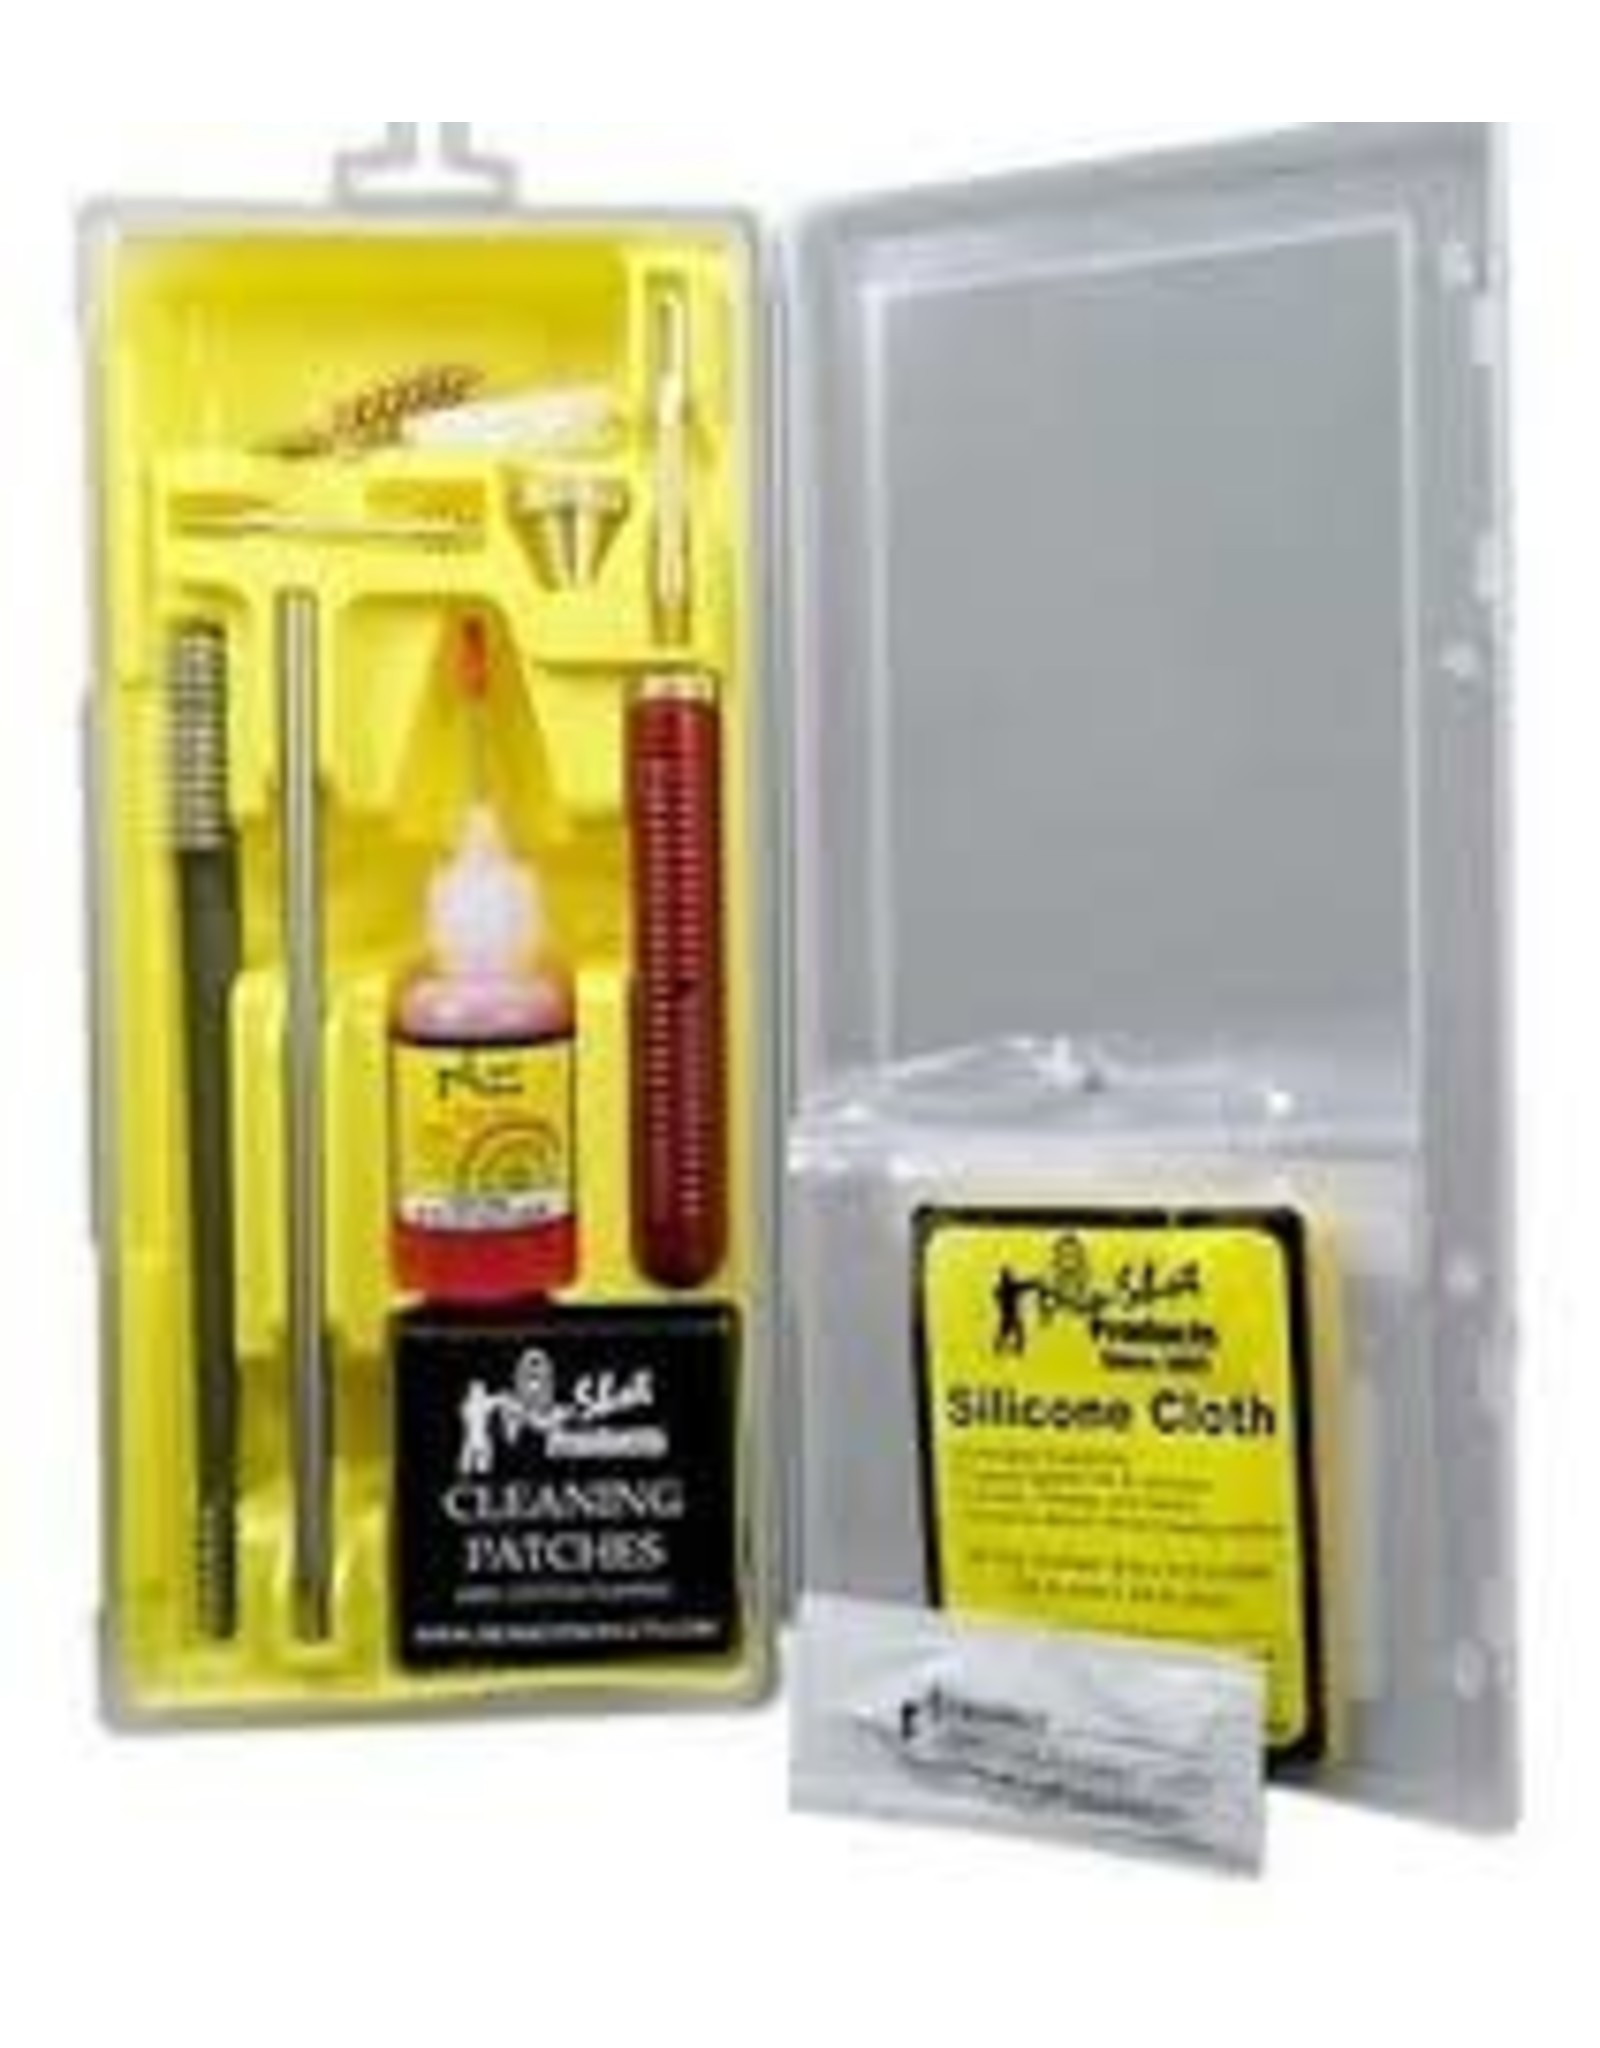 PRO SHOT PS PISTOL CLEANING KIT 40-41CAL/10MM